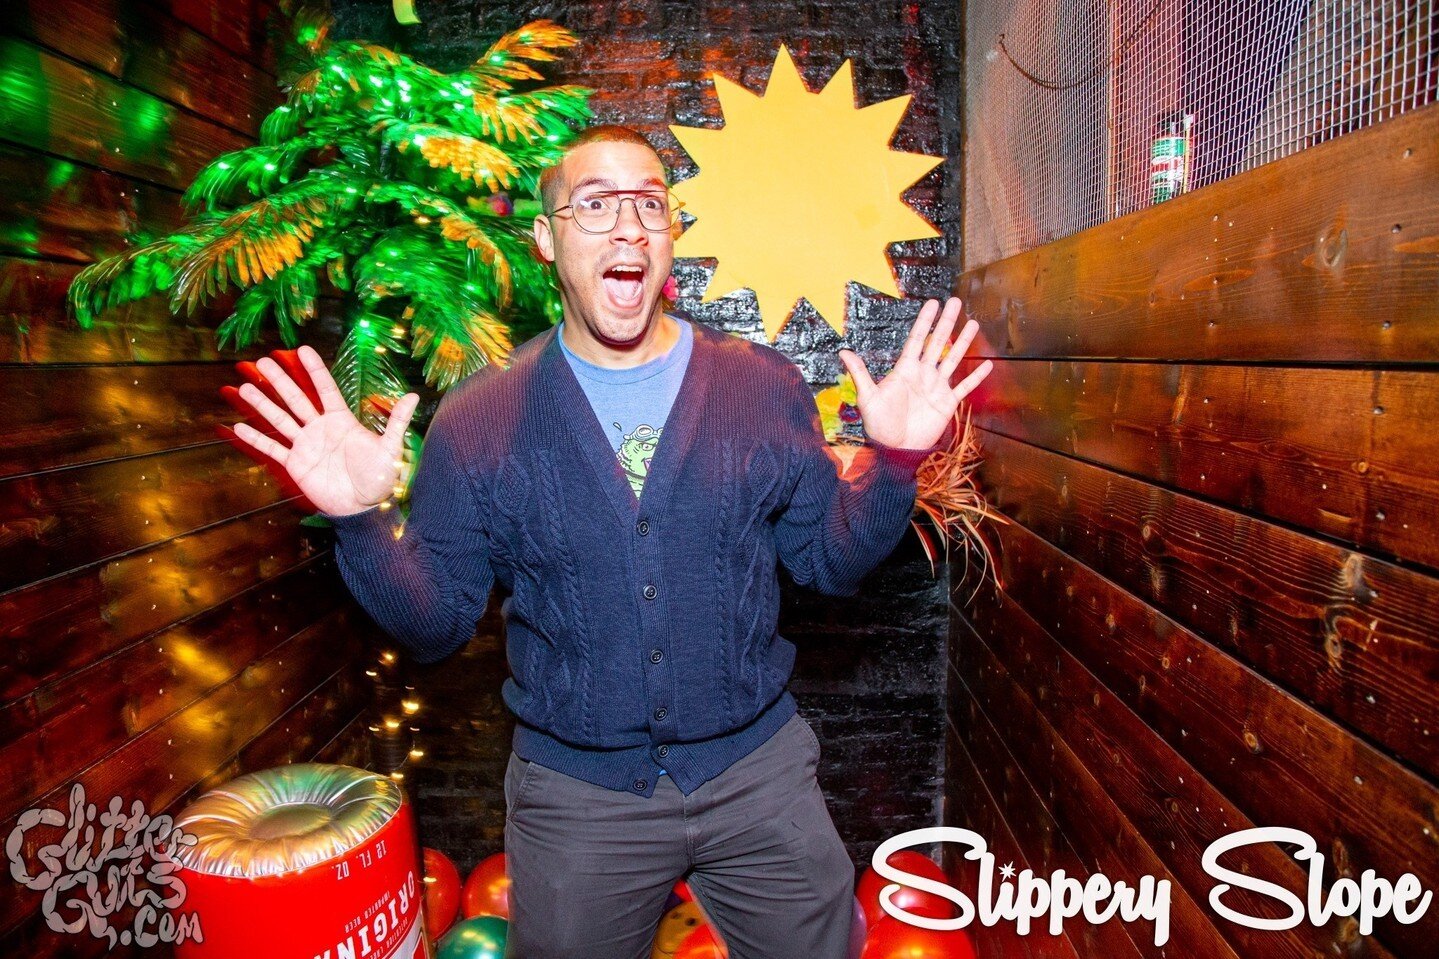 @thedjintel is in the house! Let&rsquo;s drink some late night cocktails, beers, and dance all night long! No cover. Open 8pm-2am.⁠
📷: @glittergutsy⁠
⁠
#slipperyslope #chicagodjs #logansquare #logansquarechicago #scofflaw #danceparty #divebar #dance